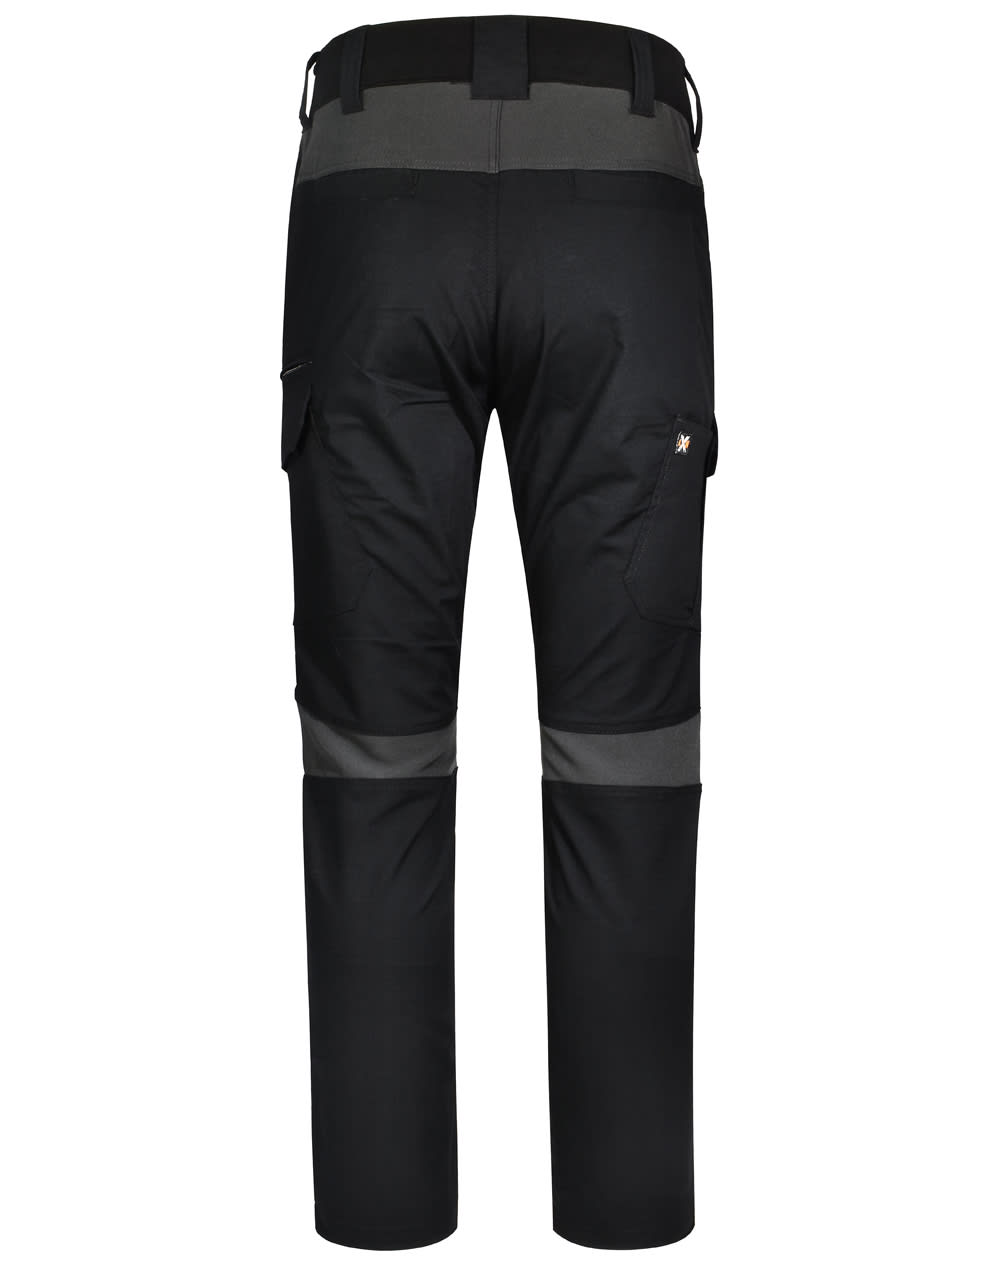 Unisex Ripstop Stretch Work Pants WP24 | 